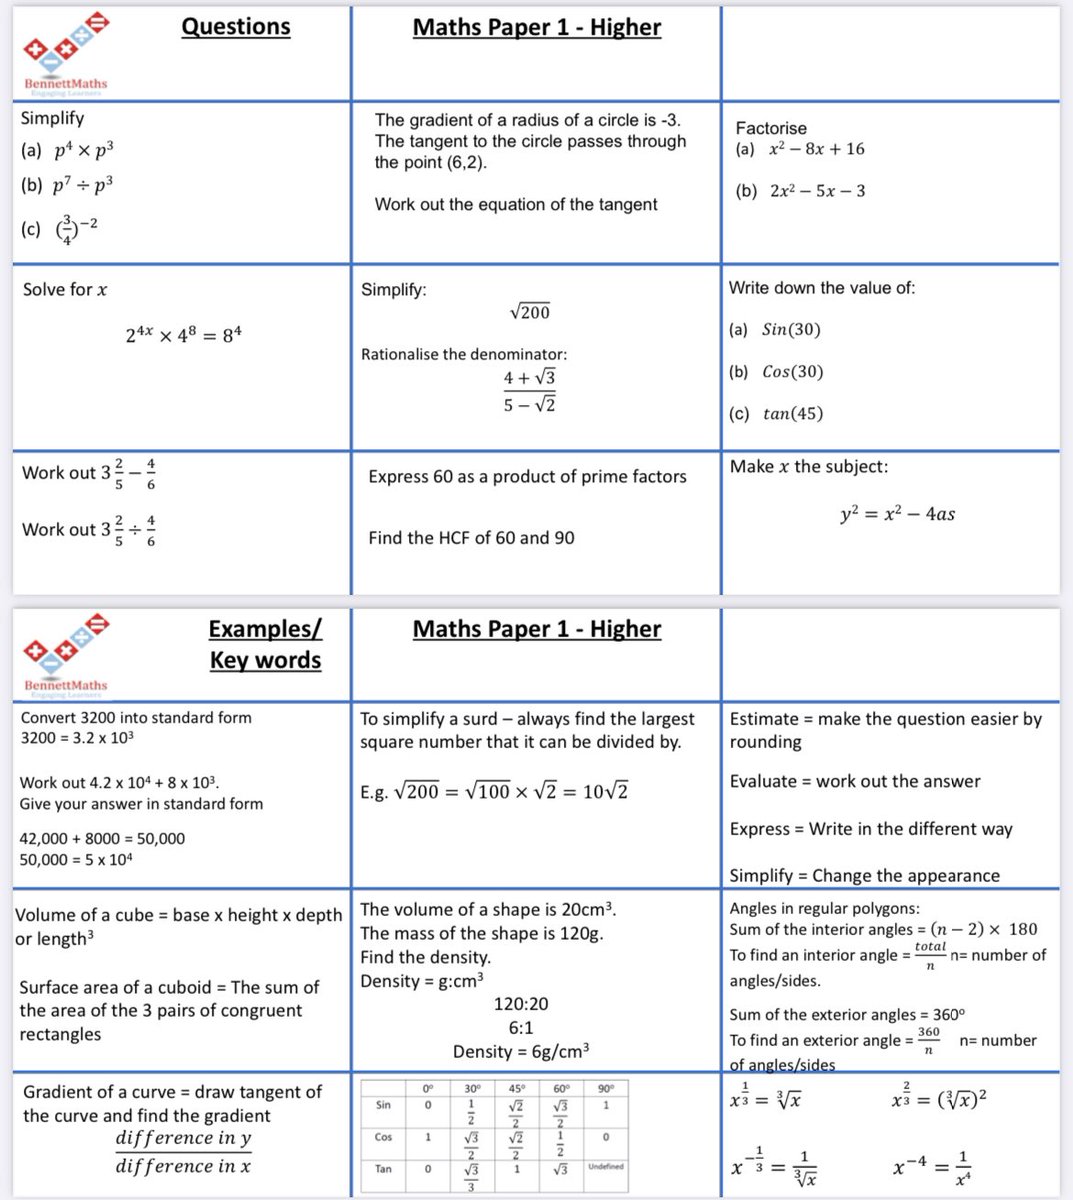 **BRAND NEW**
Best guess papers and breakfast revision mats are now available for paper 1. 

bennettmaths.com/gcse-revision/…

#gcserevision #gcsemaths #mathschat #mathscpdchat #mathsrevision